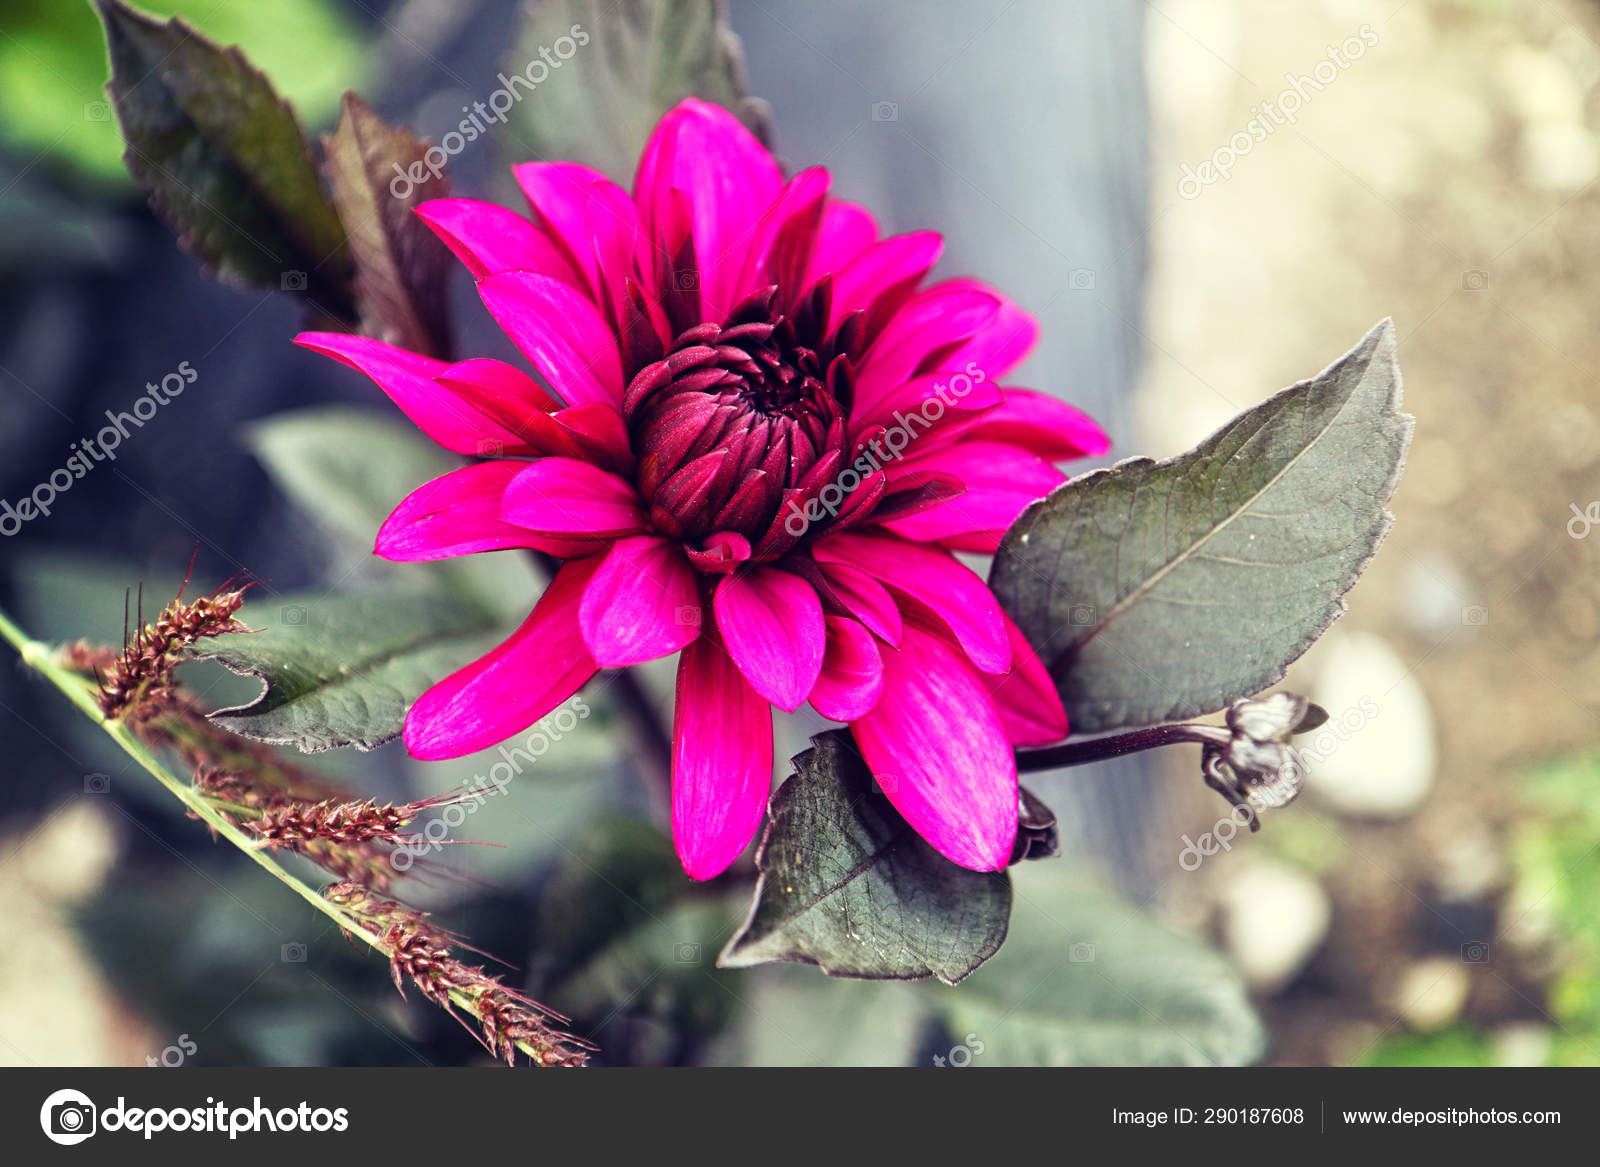 Beautiful Pink Purple Dahlia Flower Natural Symmetry Variegated Colors Soft Stock Photo C Gameover2012 290187608